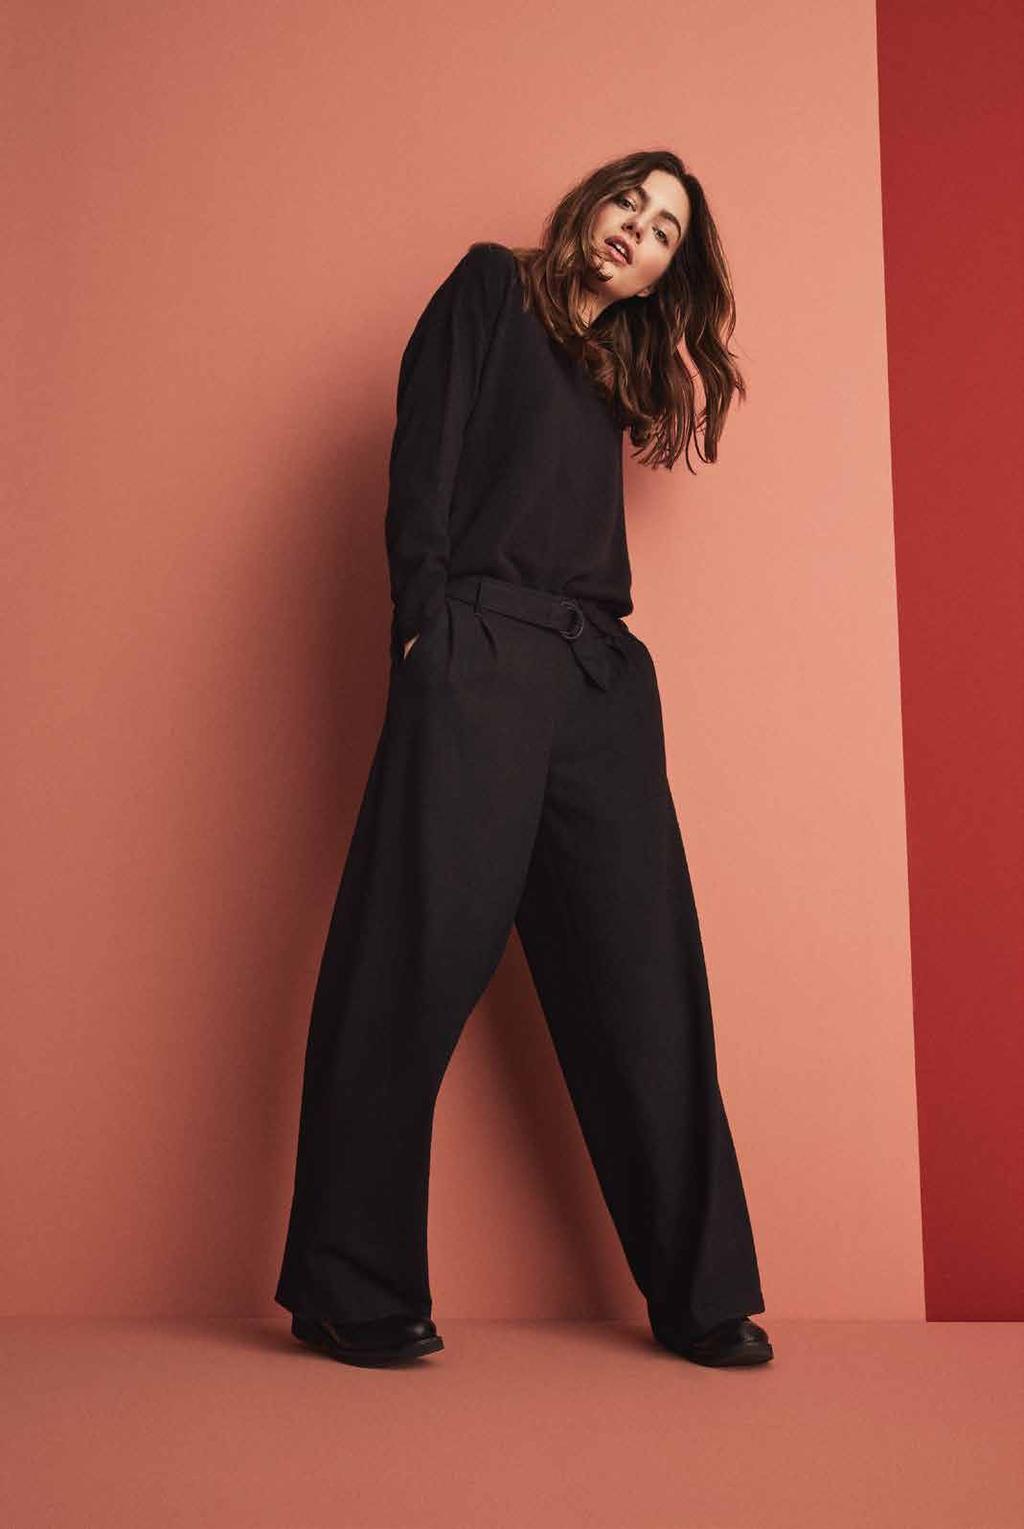 and bright pink Icone pull over and Perspective trousers pull pull over 99 existe aussi en ivoire, gris et rose grenade also